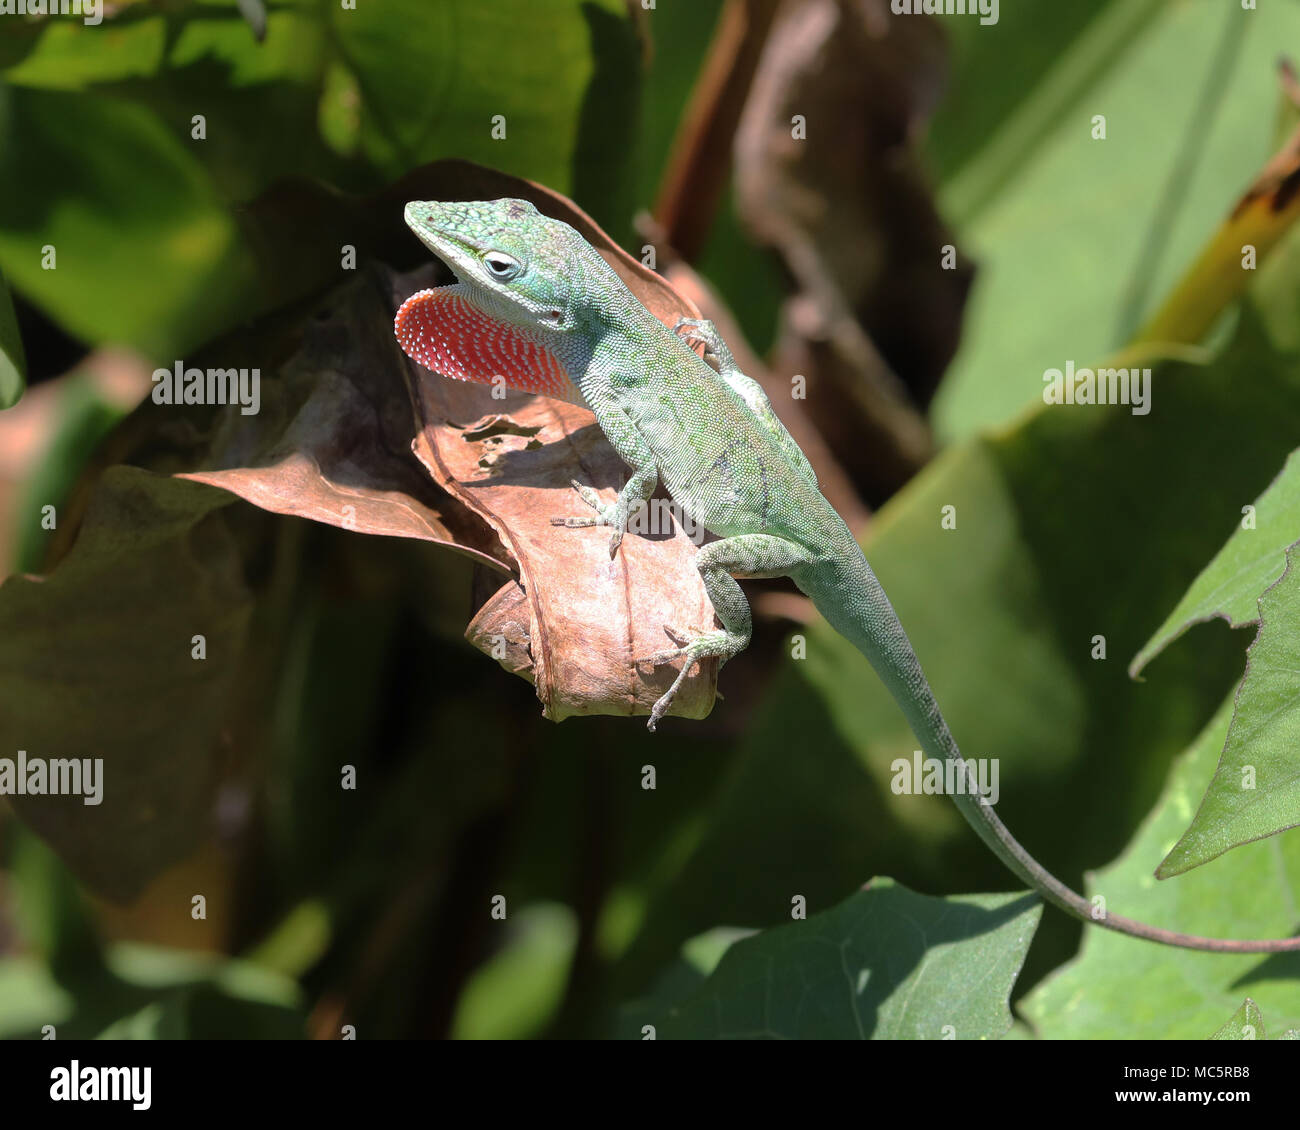 Carolina green Anole lizard climbing on leaves with dewlap extended Stock Photo